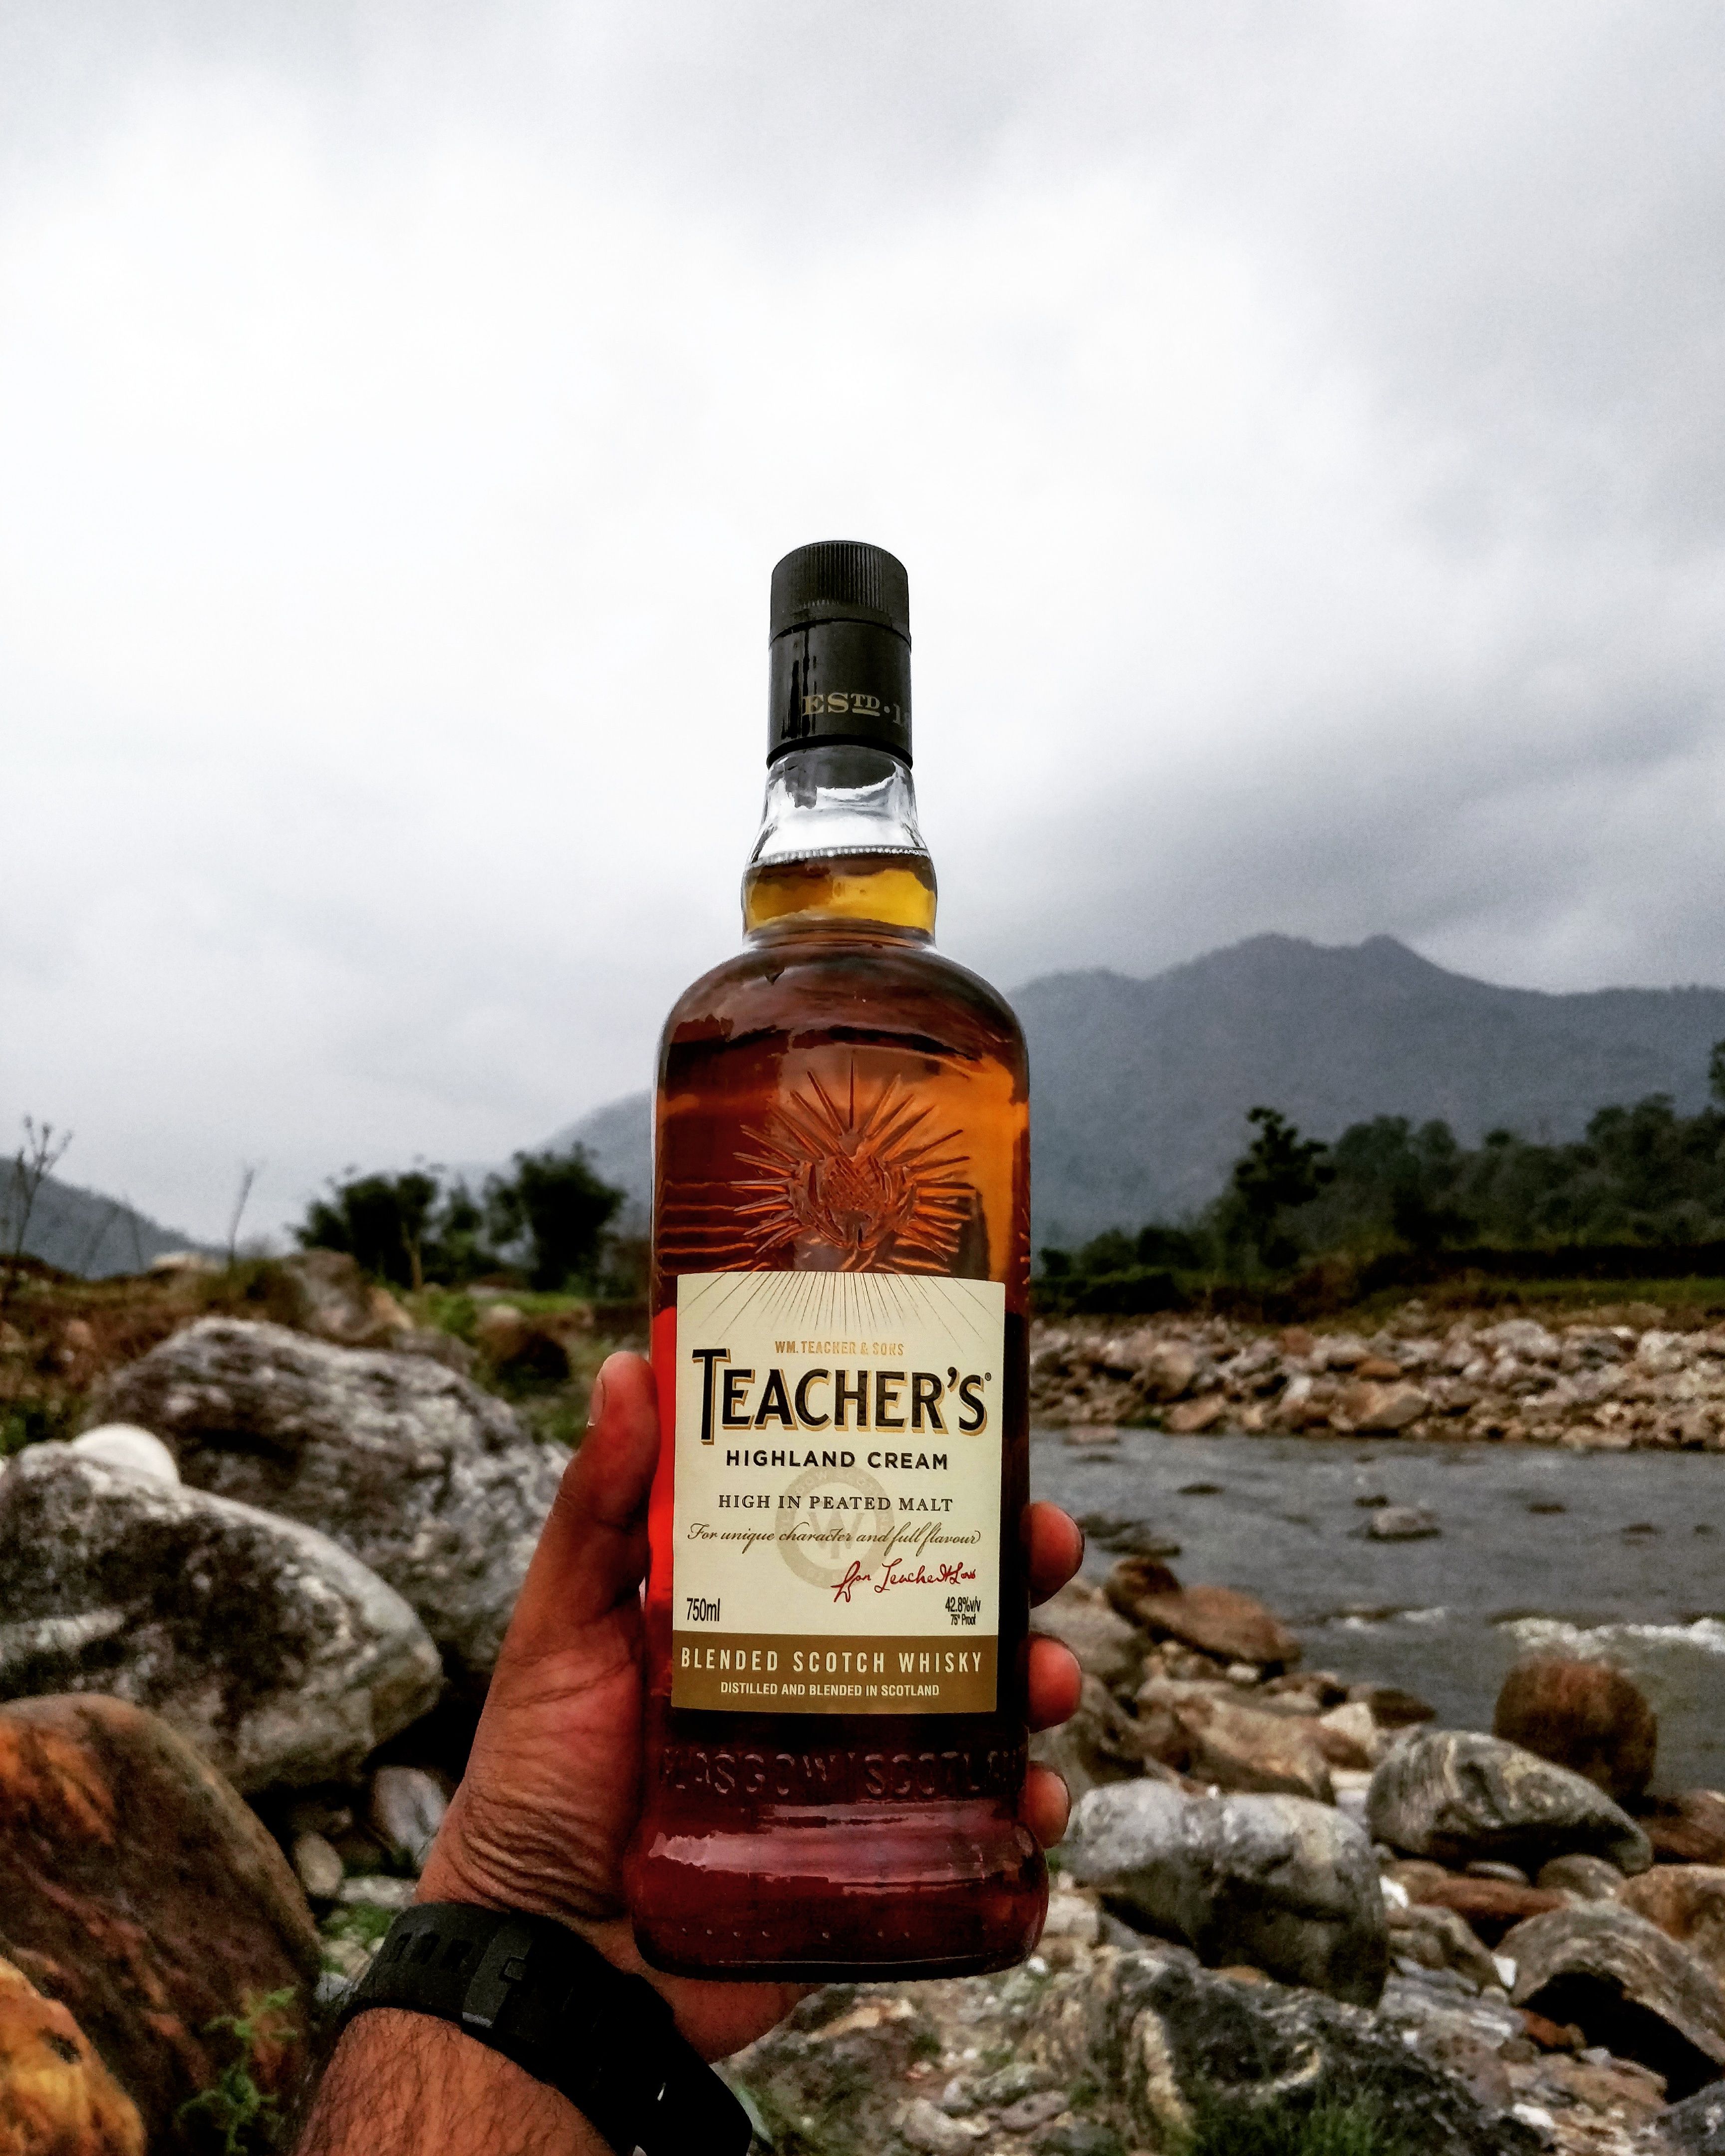 Free of liqour, nature, whisky